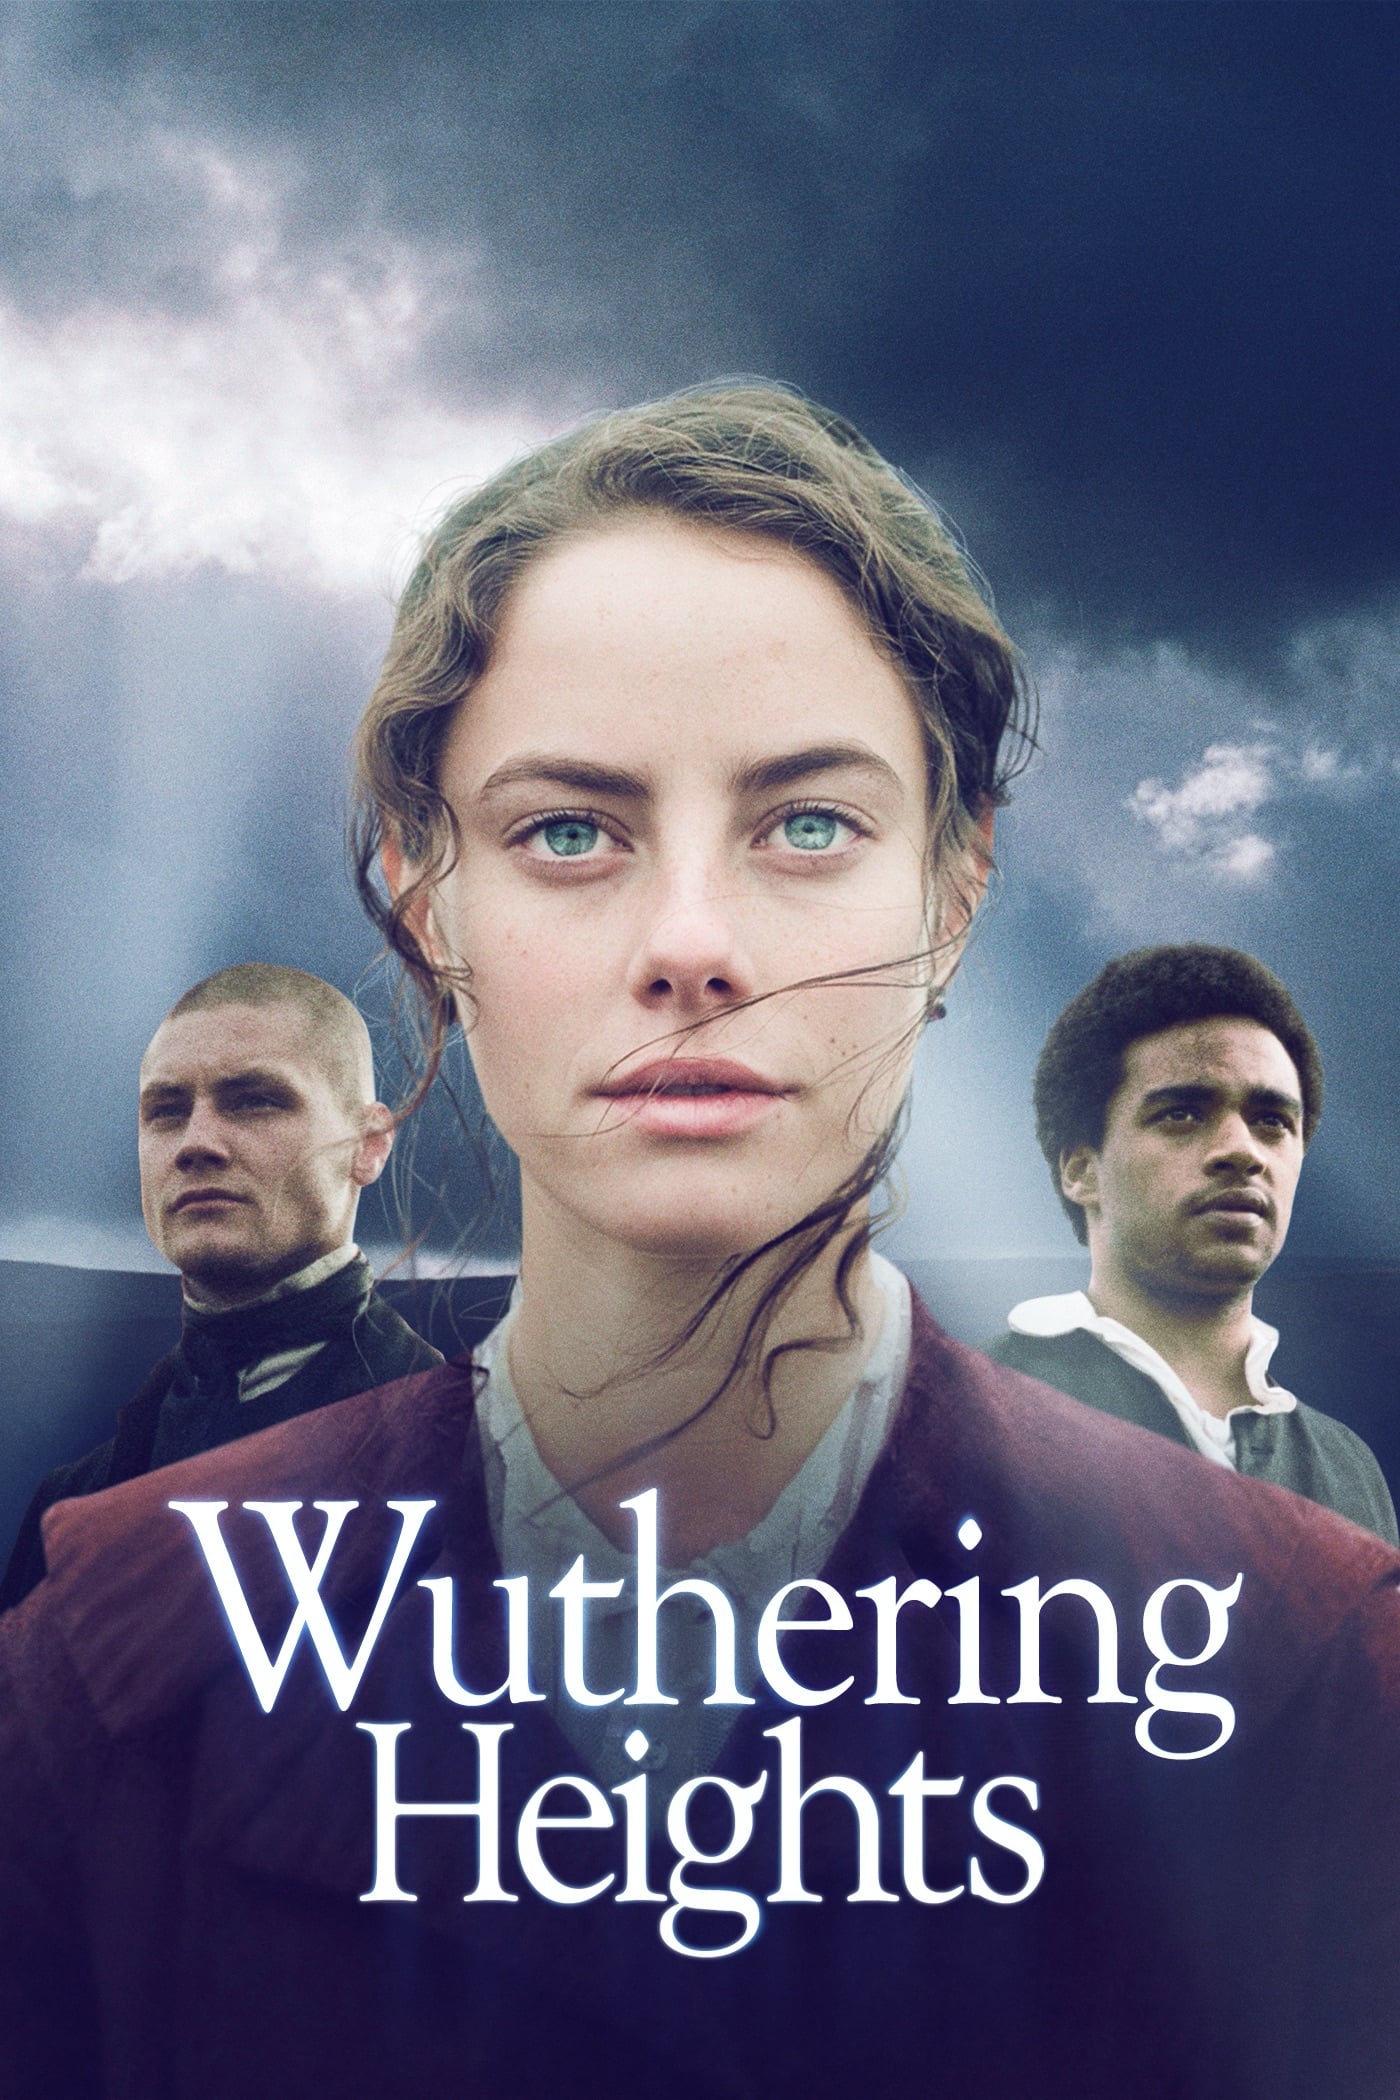 Wuthering Heights [Sub-ITA] (2011)